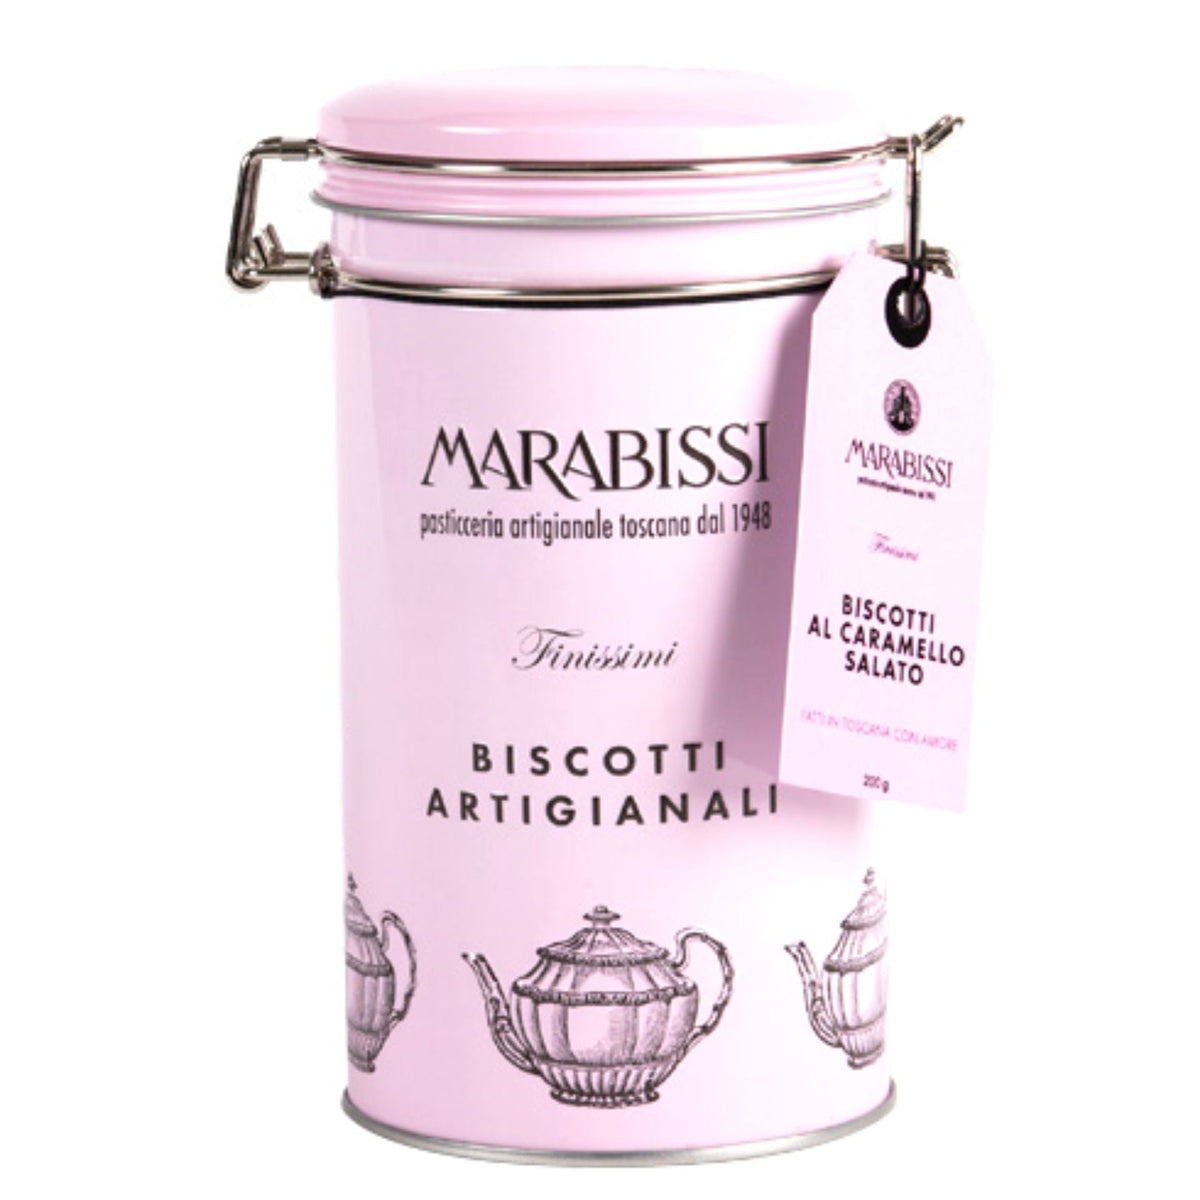 Marabissi Salted Caramel Artisan Biscuits (Tin) 200g  | Imported and distributed in the UK by Just Gourmet Foods